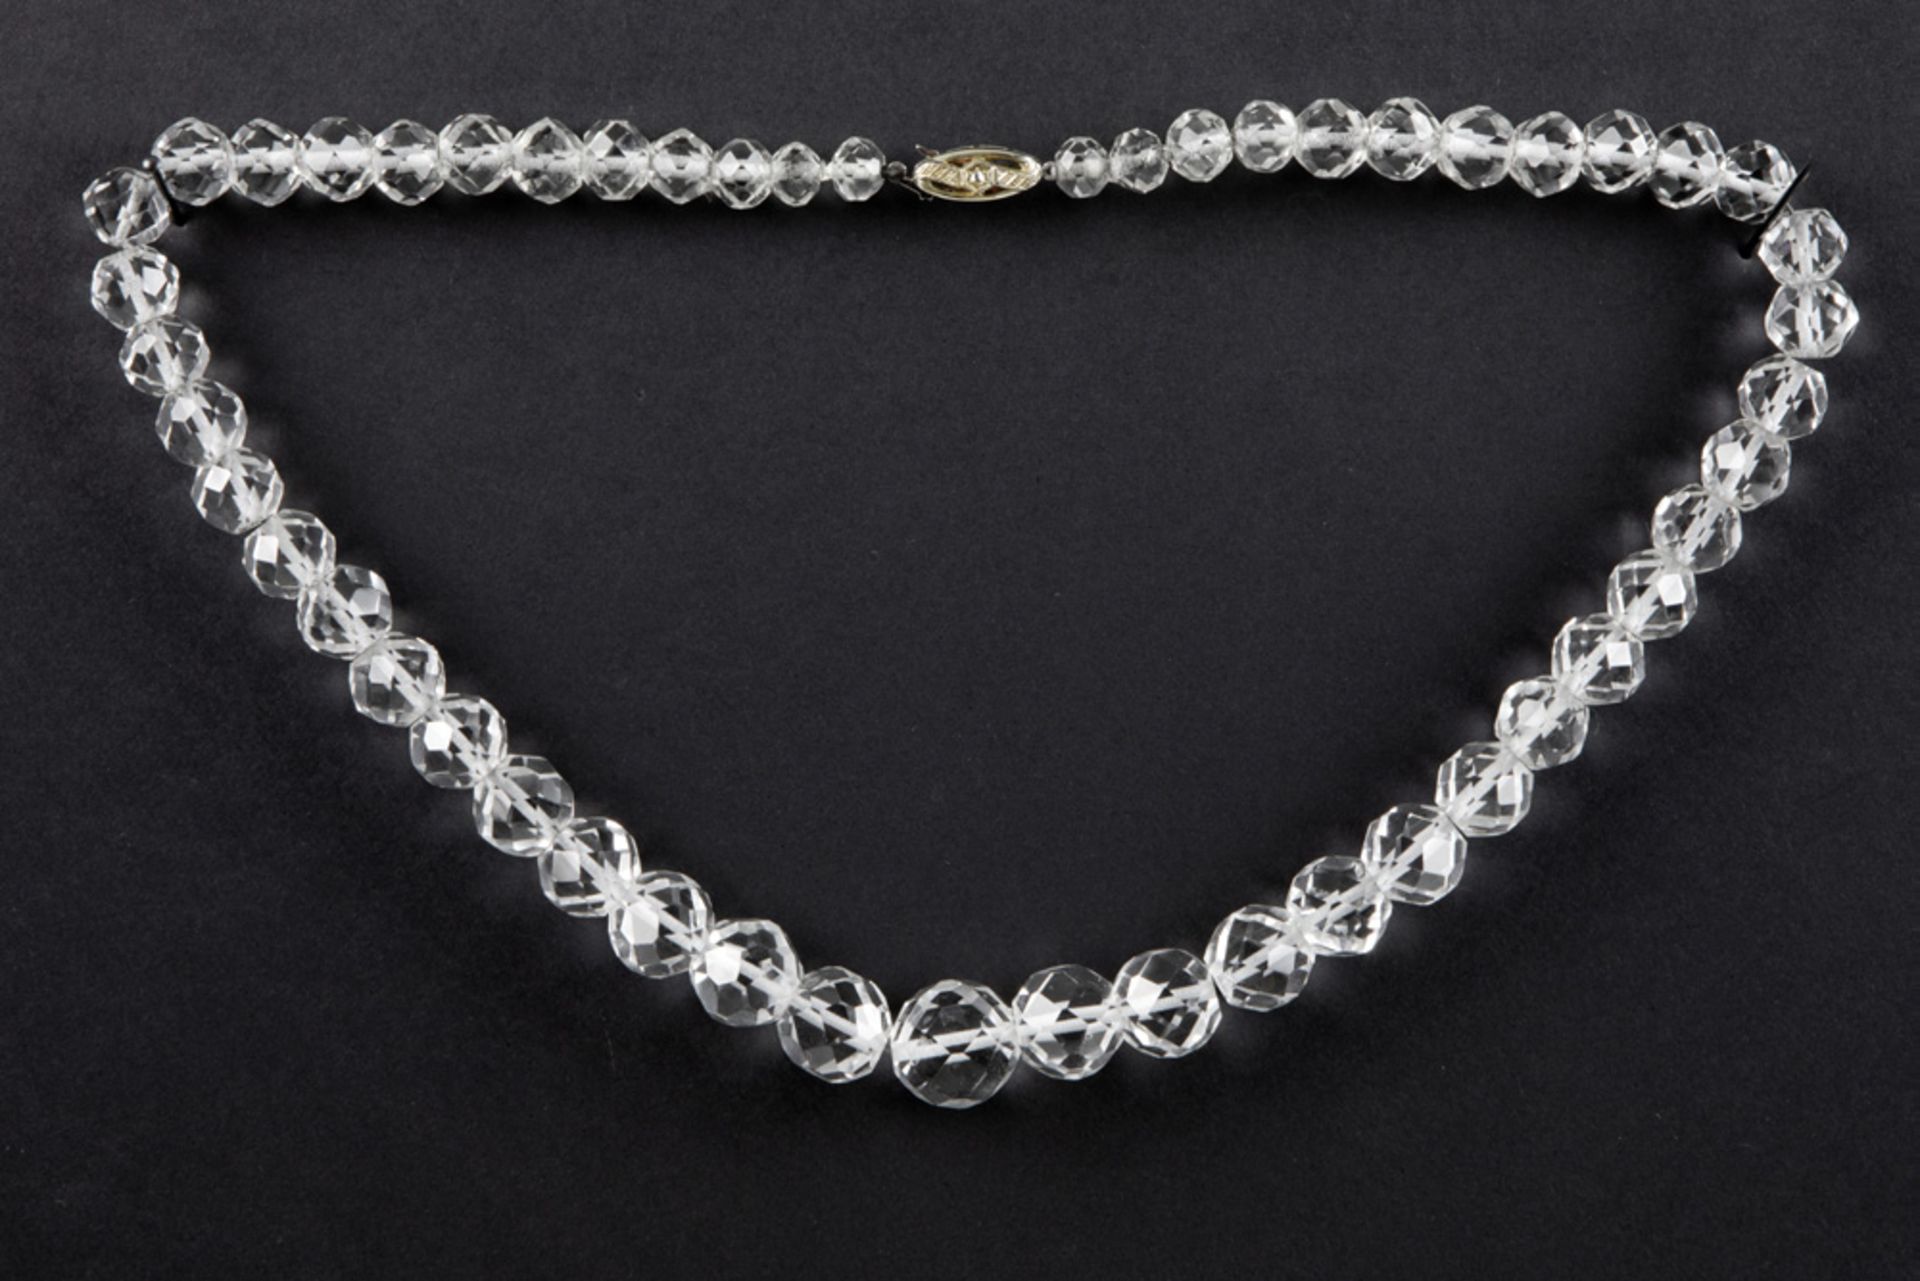 necklace with faceted rock crystal beads and with a lock in white gold (18 carat) with diamond ||